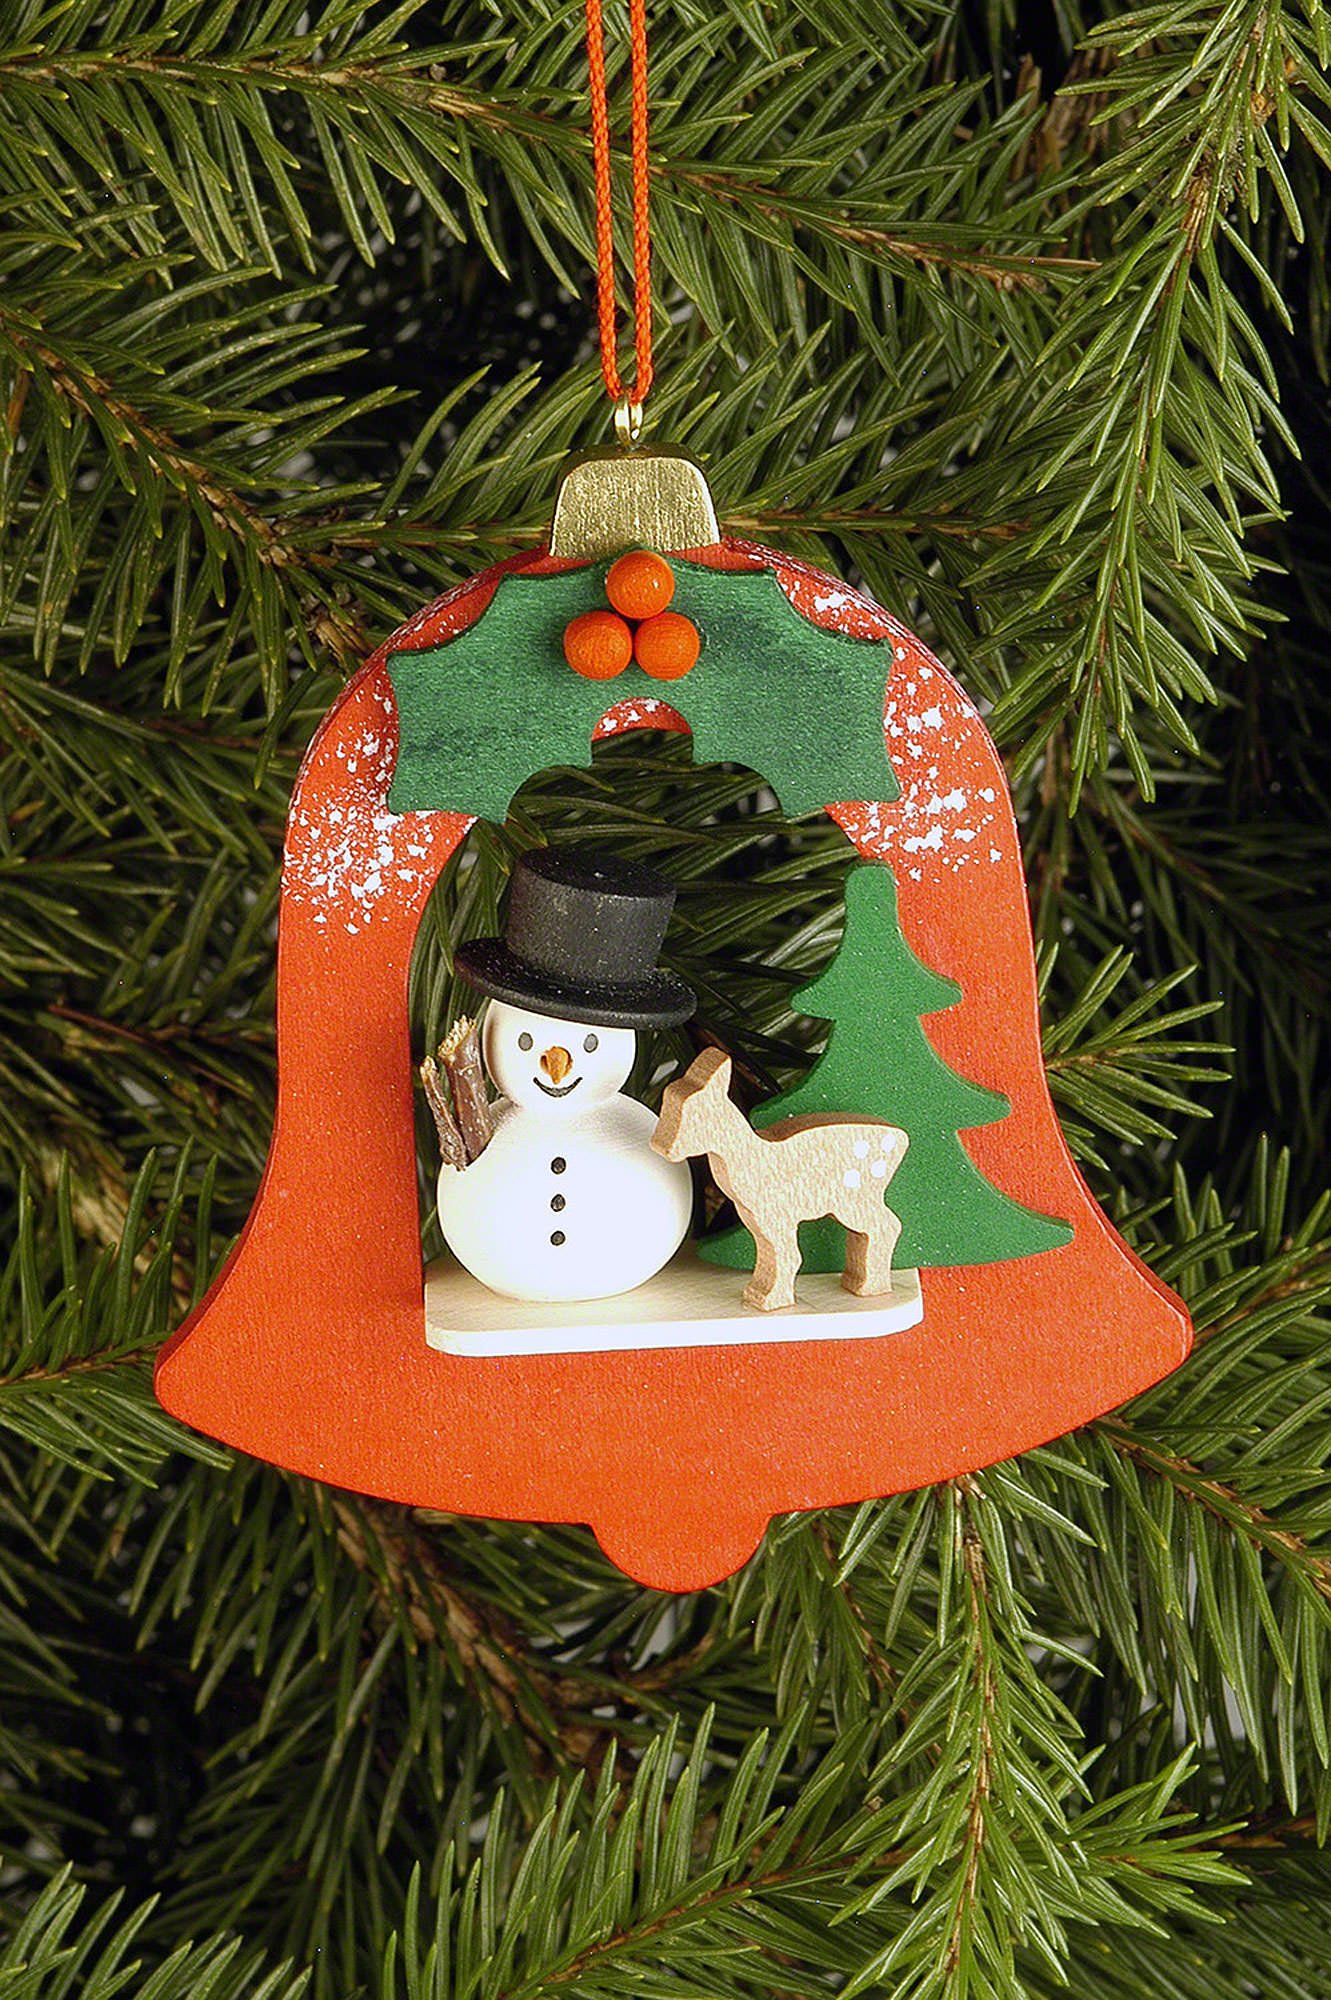 Tree Ornament - Bell with Snowman (7,1×7,9 cm/2.8×3.1in) by Christian ...